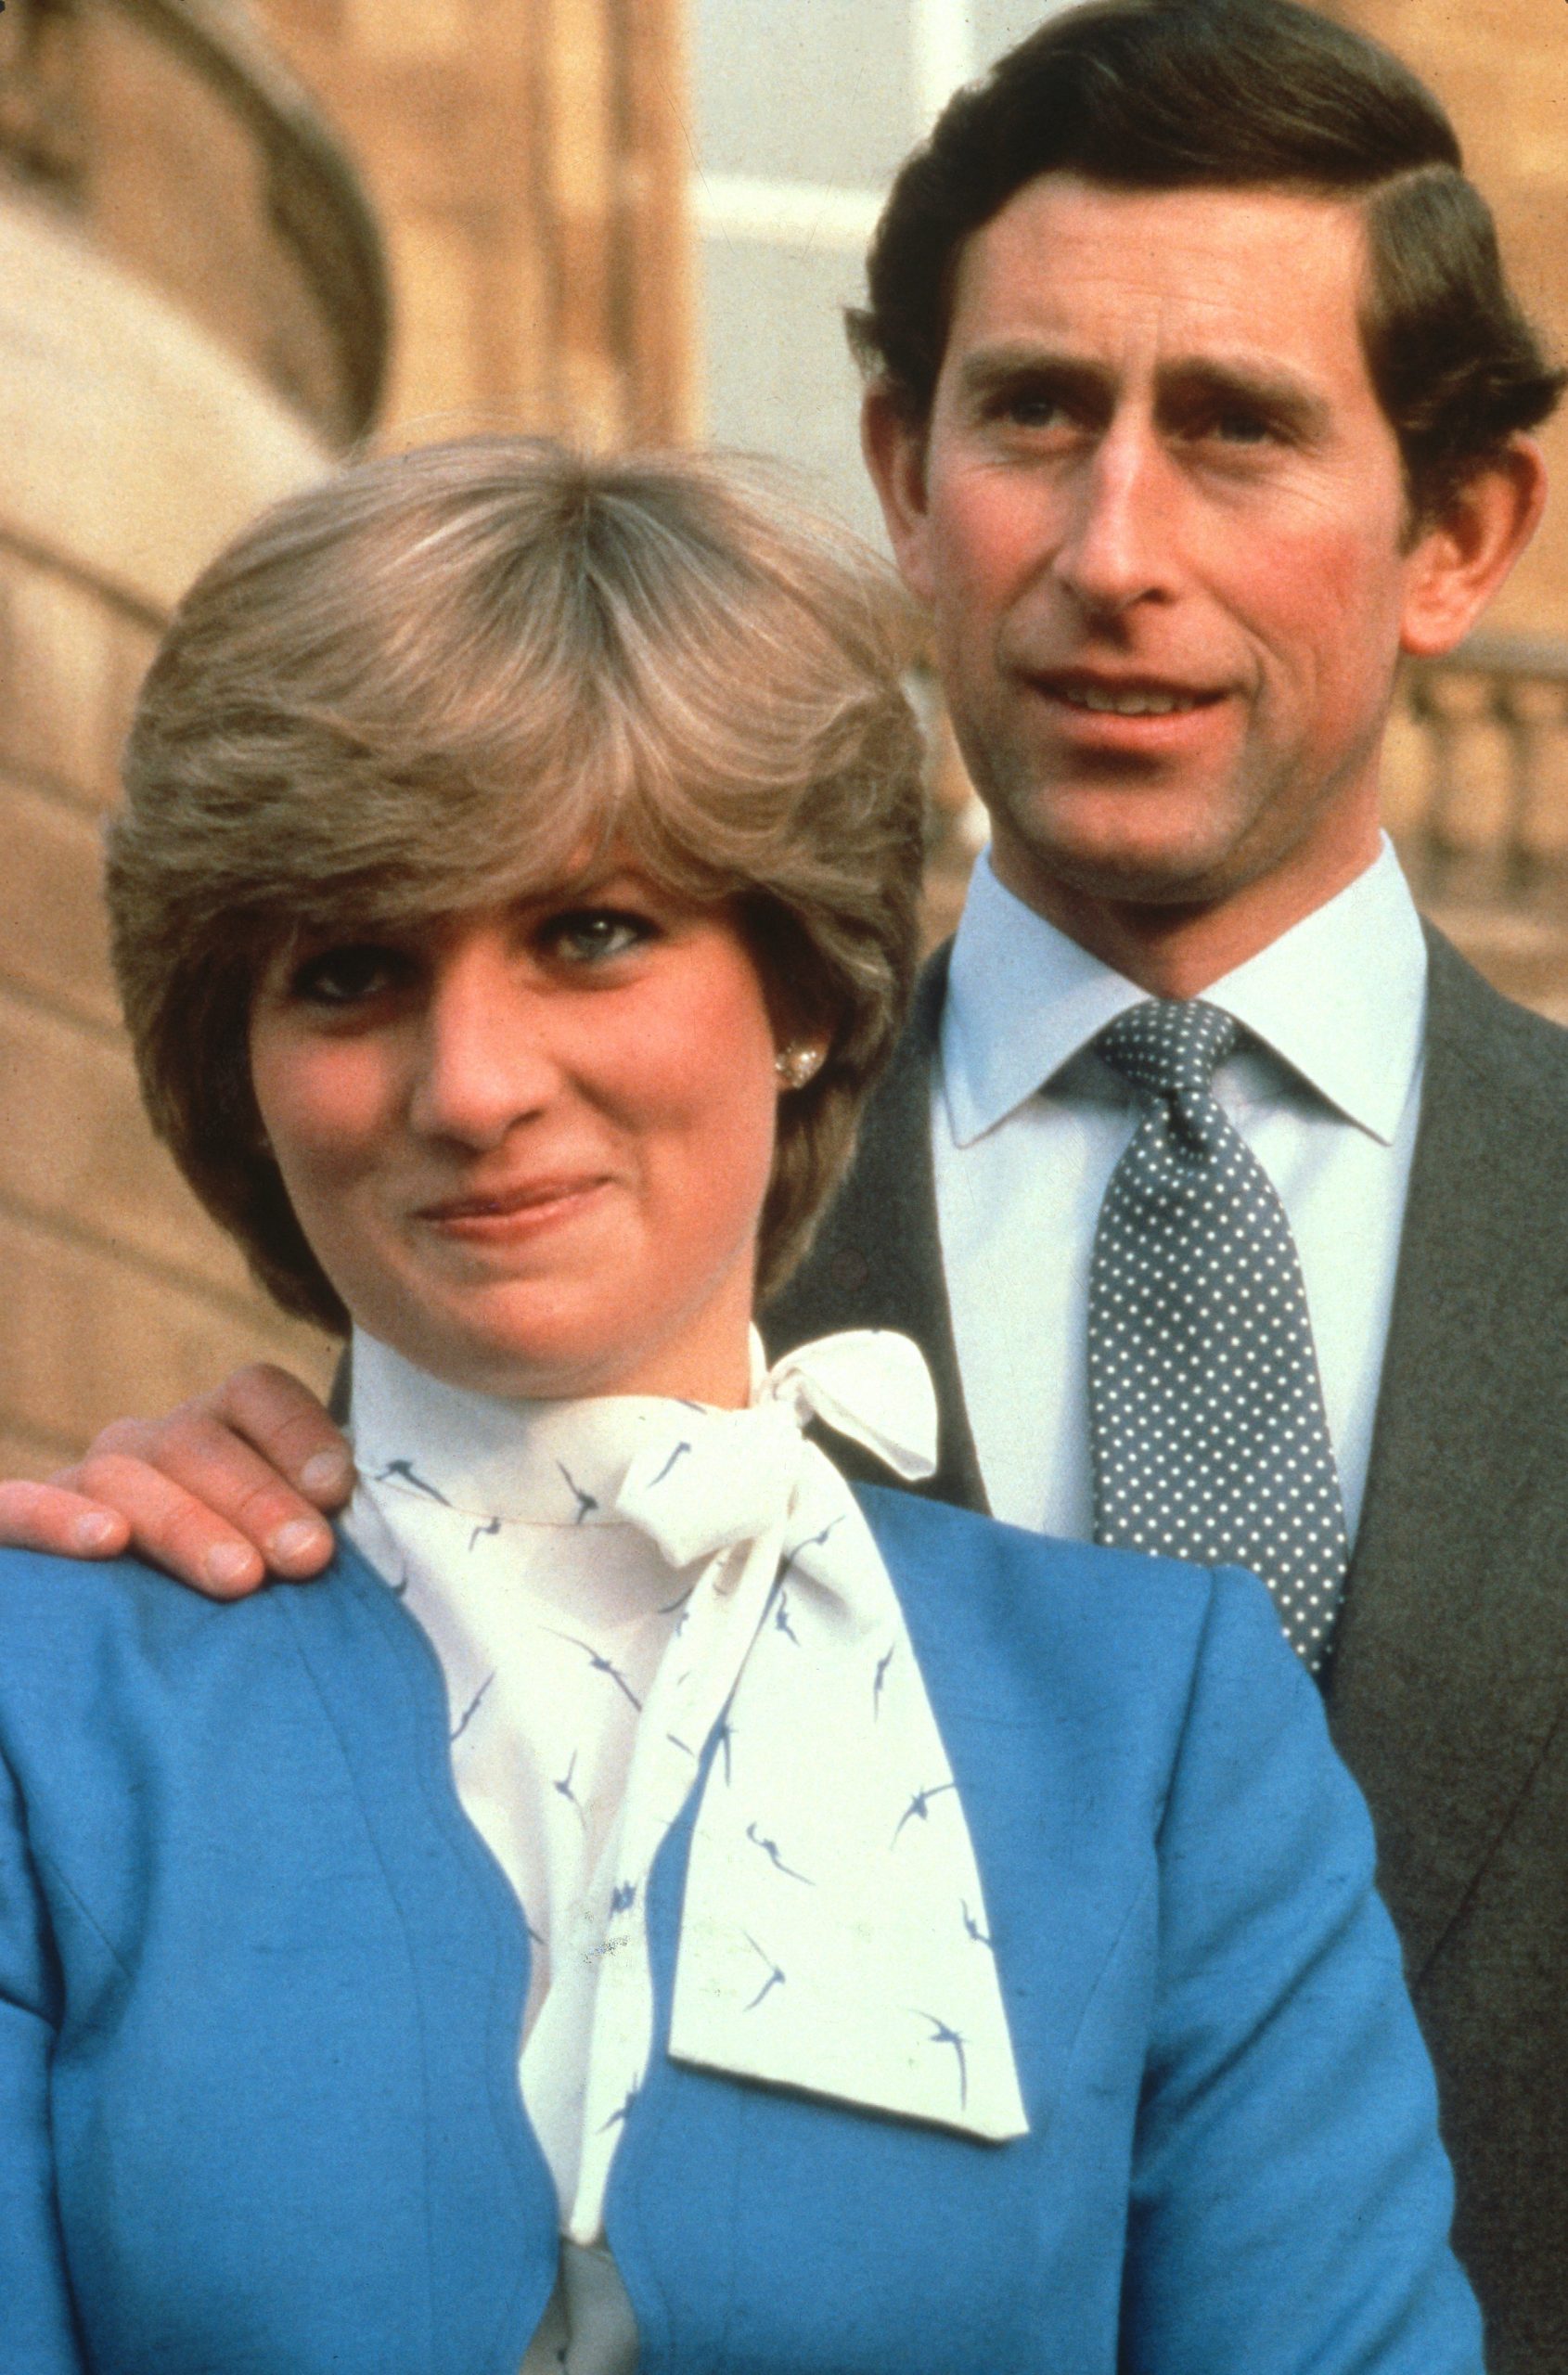 Princess Diana and Prince Charles pose for photos on the day their engagement was announced in 1981.